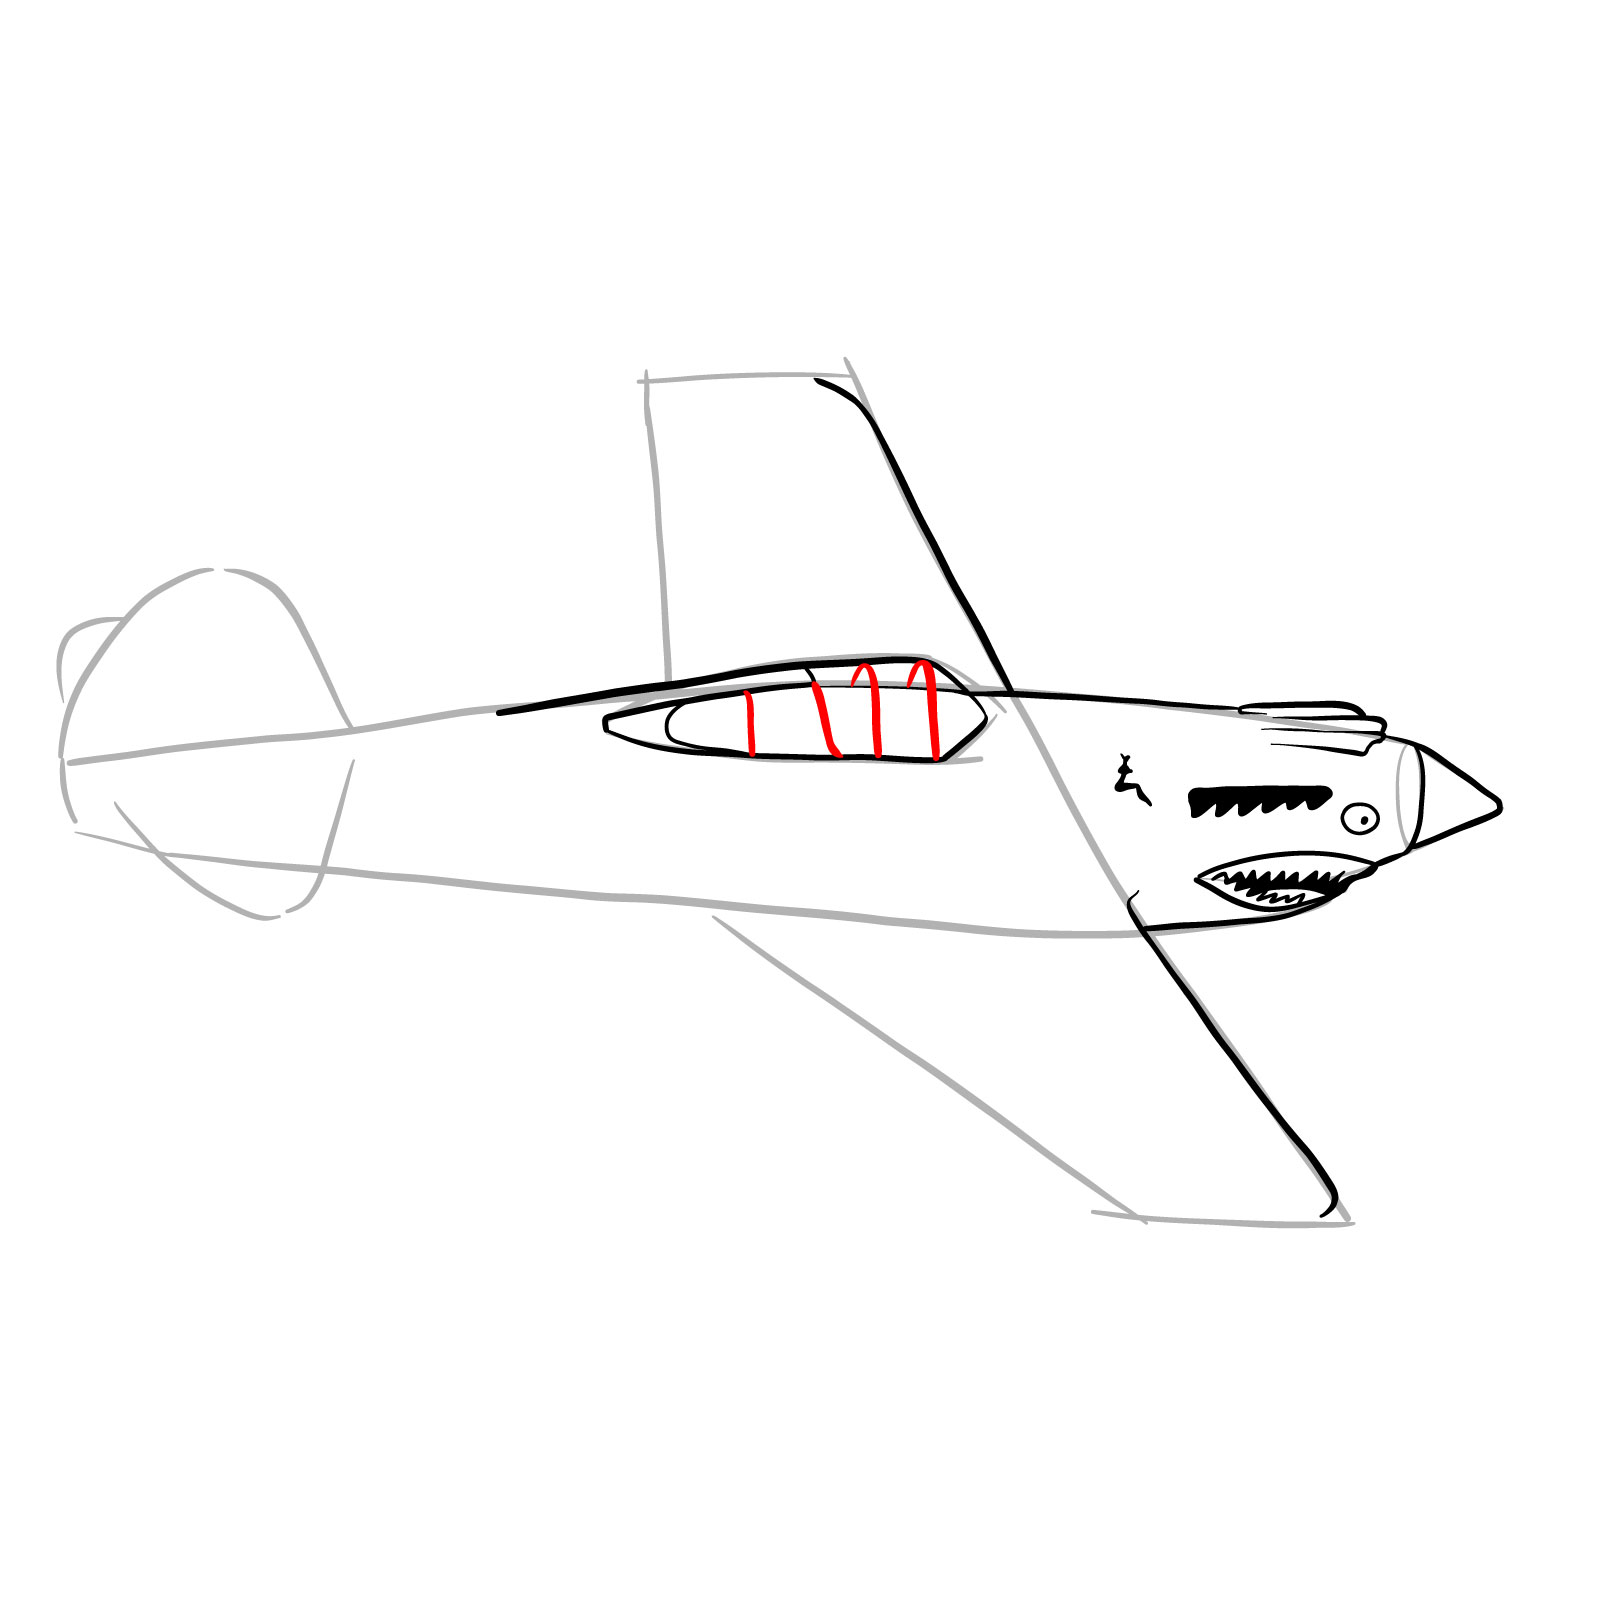 How to draw a P-40 Flying Tiger - step 15